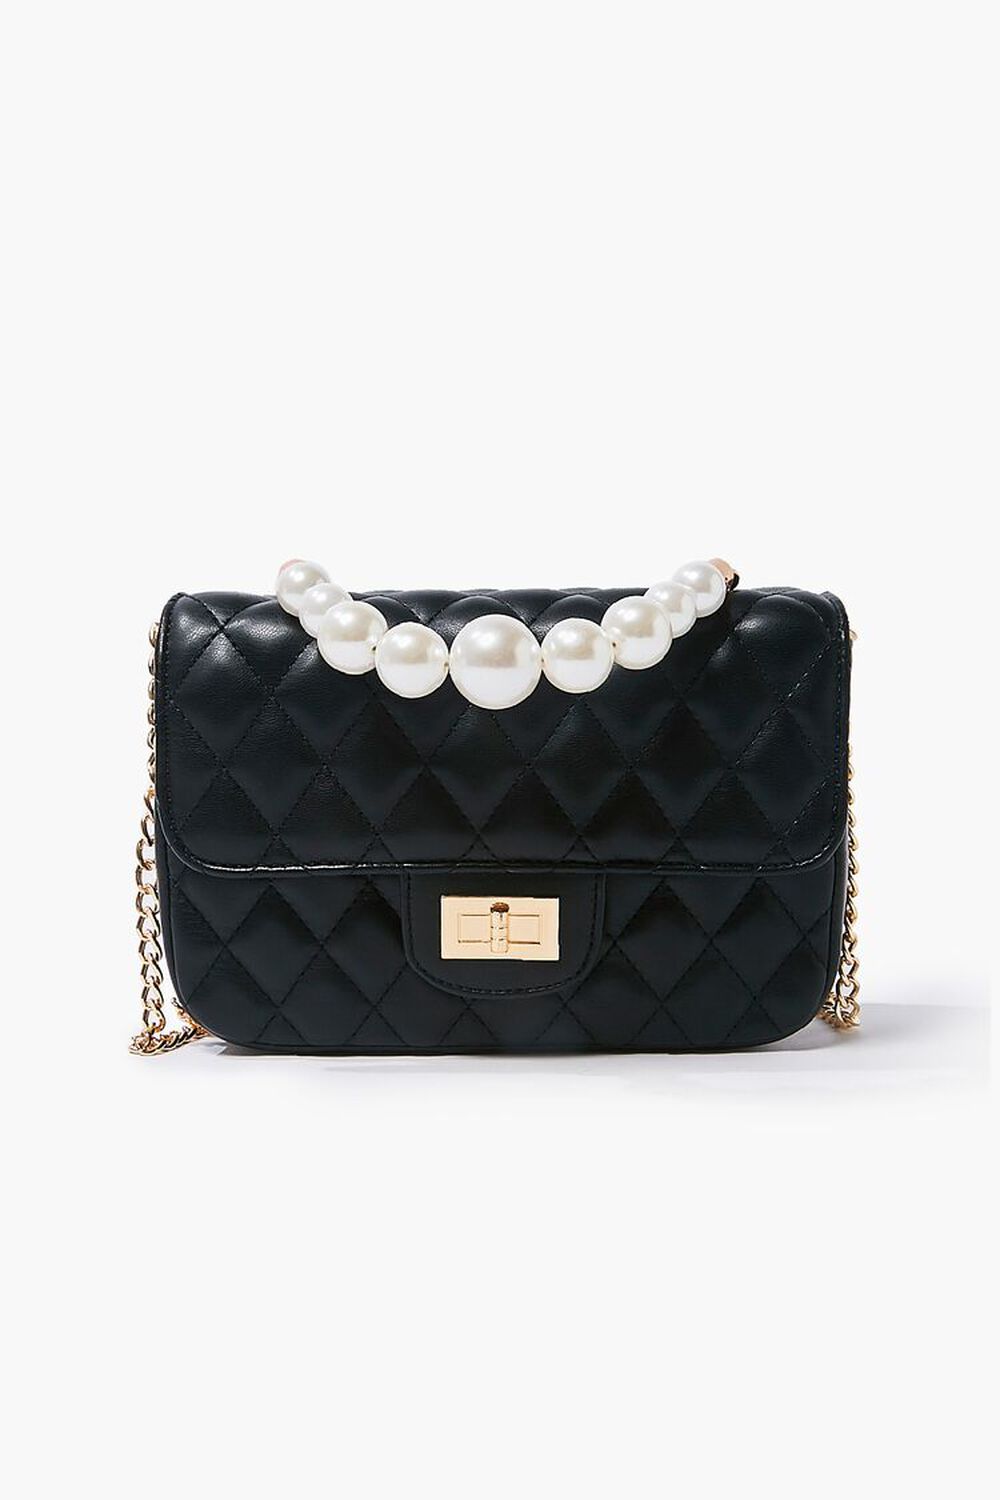 BLACK Quilted Faux Pearl Crossbody Bag, image 1